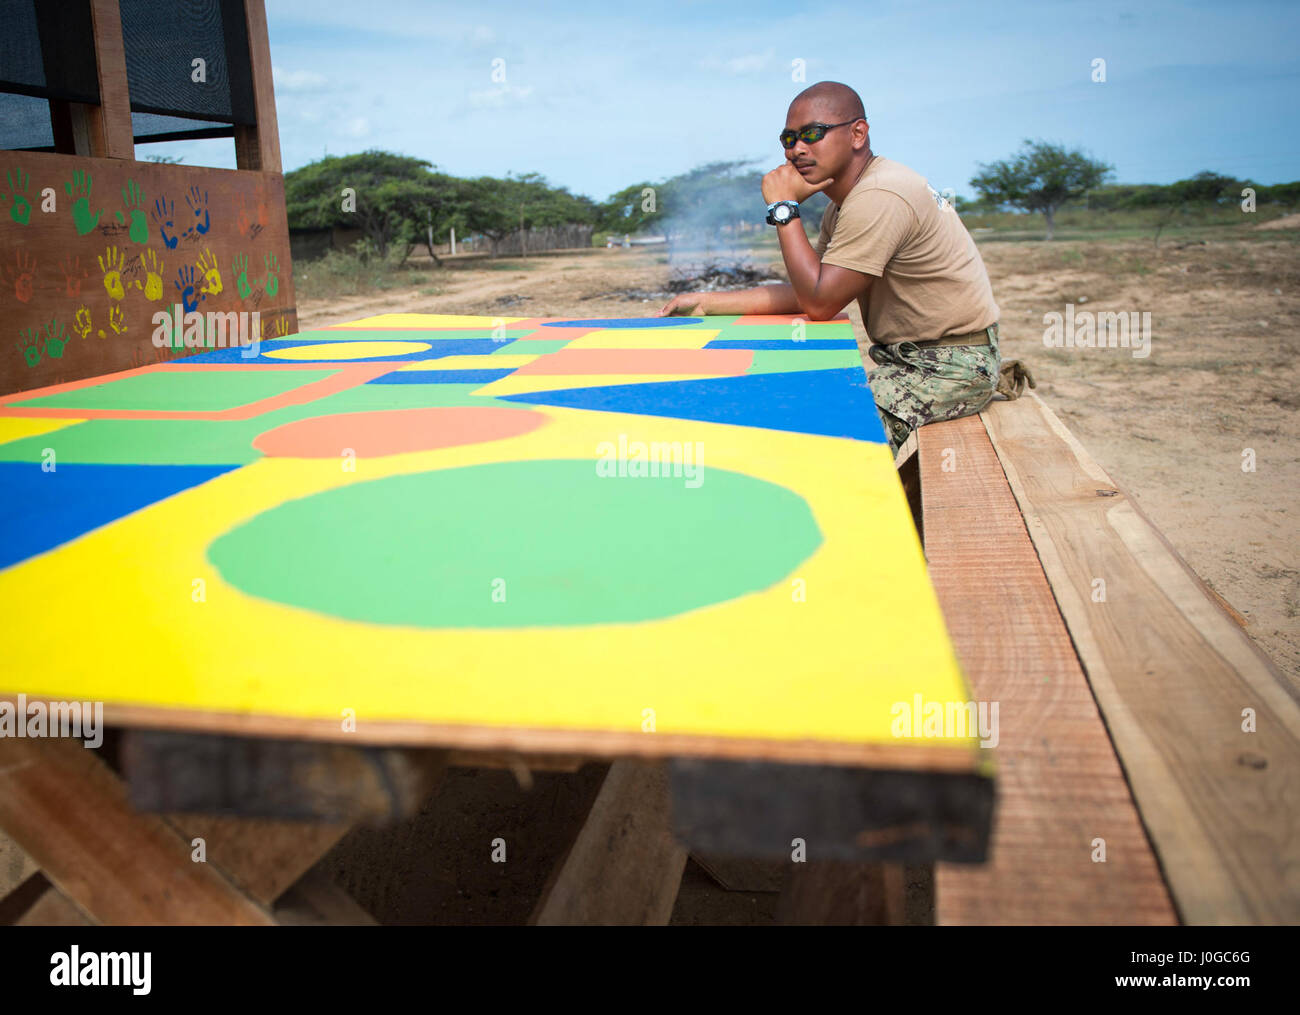 170330-N-YL073-002 MAYAPO, Colombia (March 30, 2017) - Construction Electrician 2nd Class JanRainier San Juan, a native of Fountain, Colo., assigned to Construction Battalion Maintenance Unit (CBMU) 202, Norfolk, Va., sits at a table constructed for a Wayuu tribe in Mayapo, Colombia, during Continuing Promise 2017 (CP-17). CP-17 is a U.S. Southern Command-sponsored and U.S. Naval Forces Southern Command/U.S. 4th Fleet-conducted deployment to conduct civil-military operations including humanitarian assistance, training engagements, medical, dental, and veterinary support in an effort to show U. Stock Photo